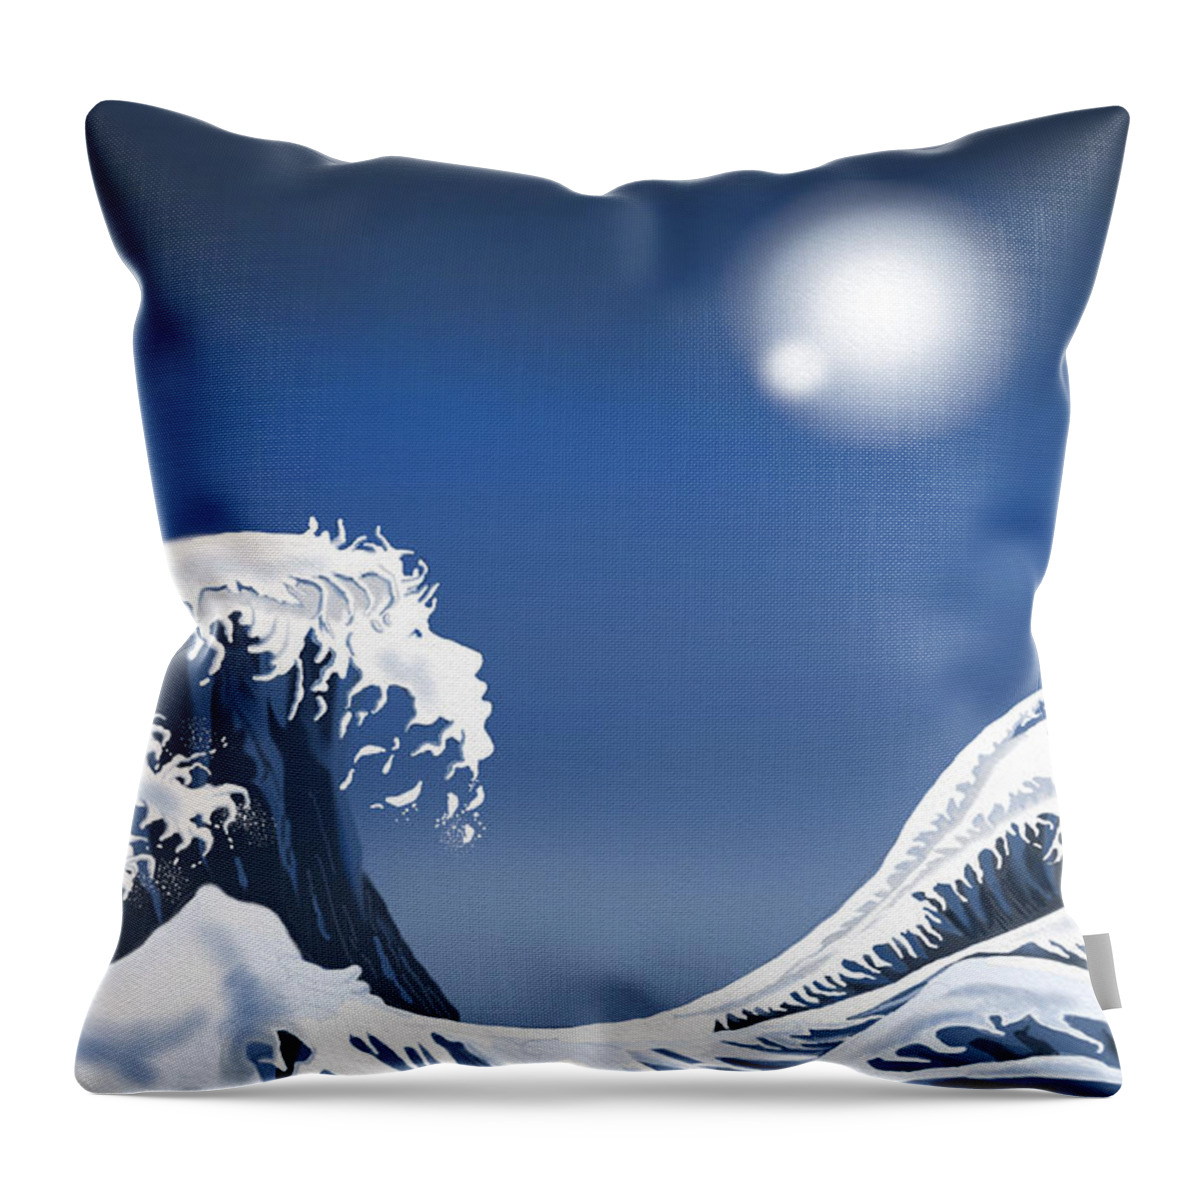 Waves Throw Pillow featuring the digital art Passing Wave by Douglas Day Jones